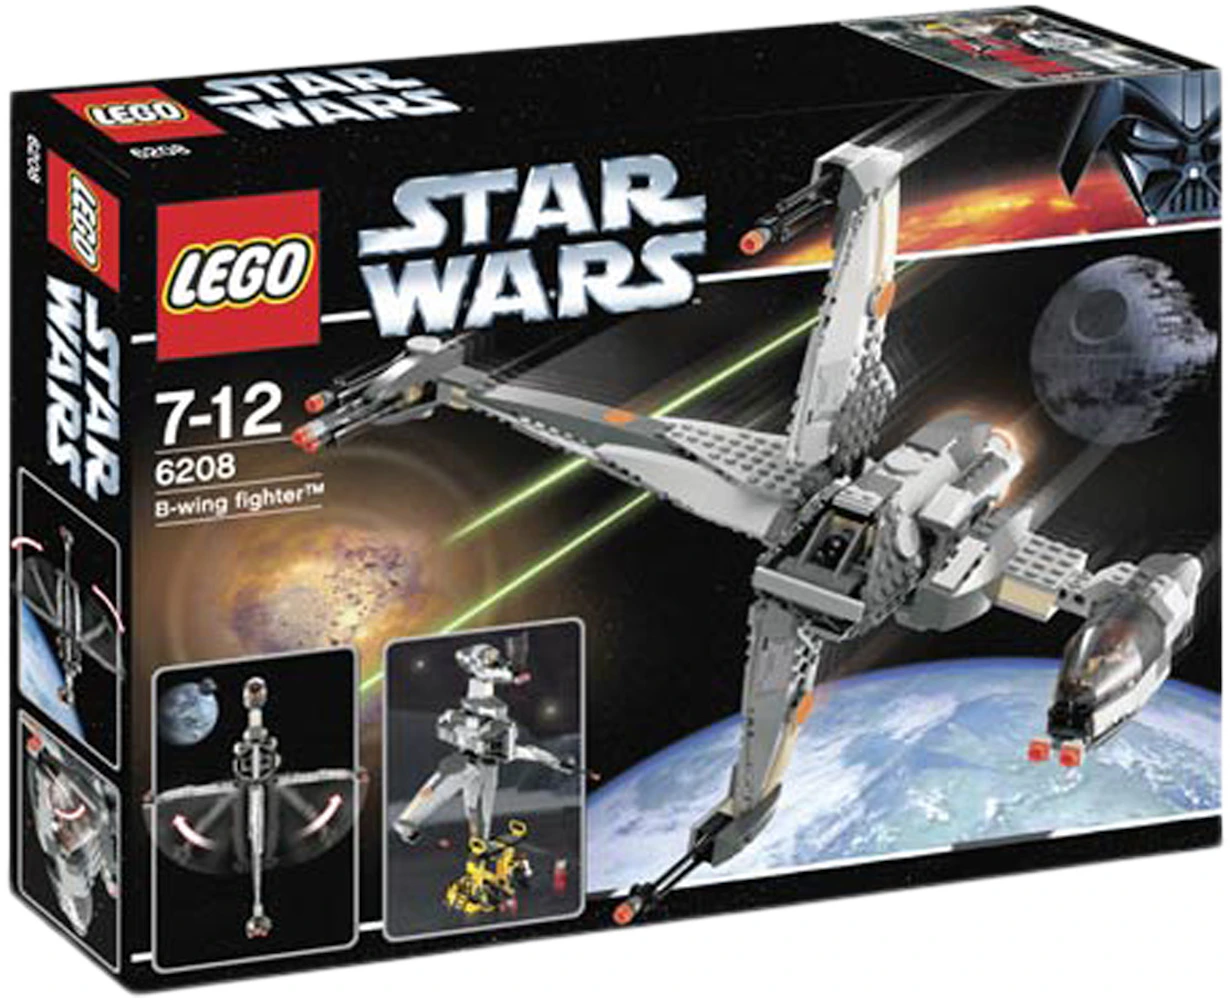 LEGO Star Wars B-wing Fighter 6208 - US